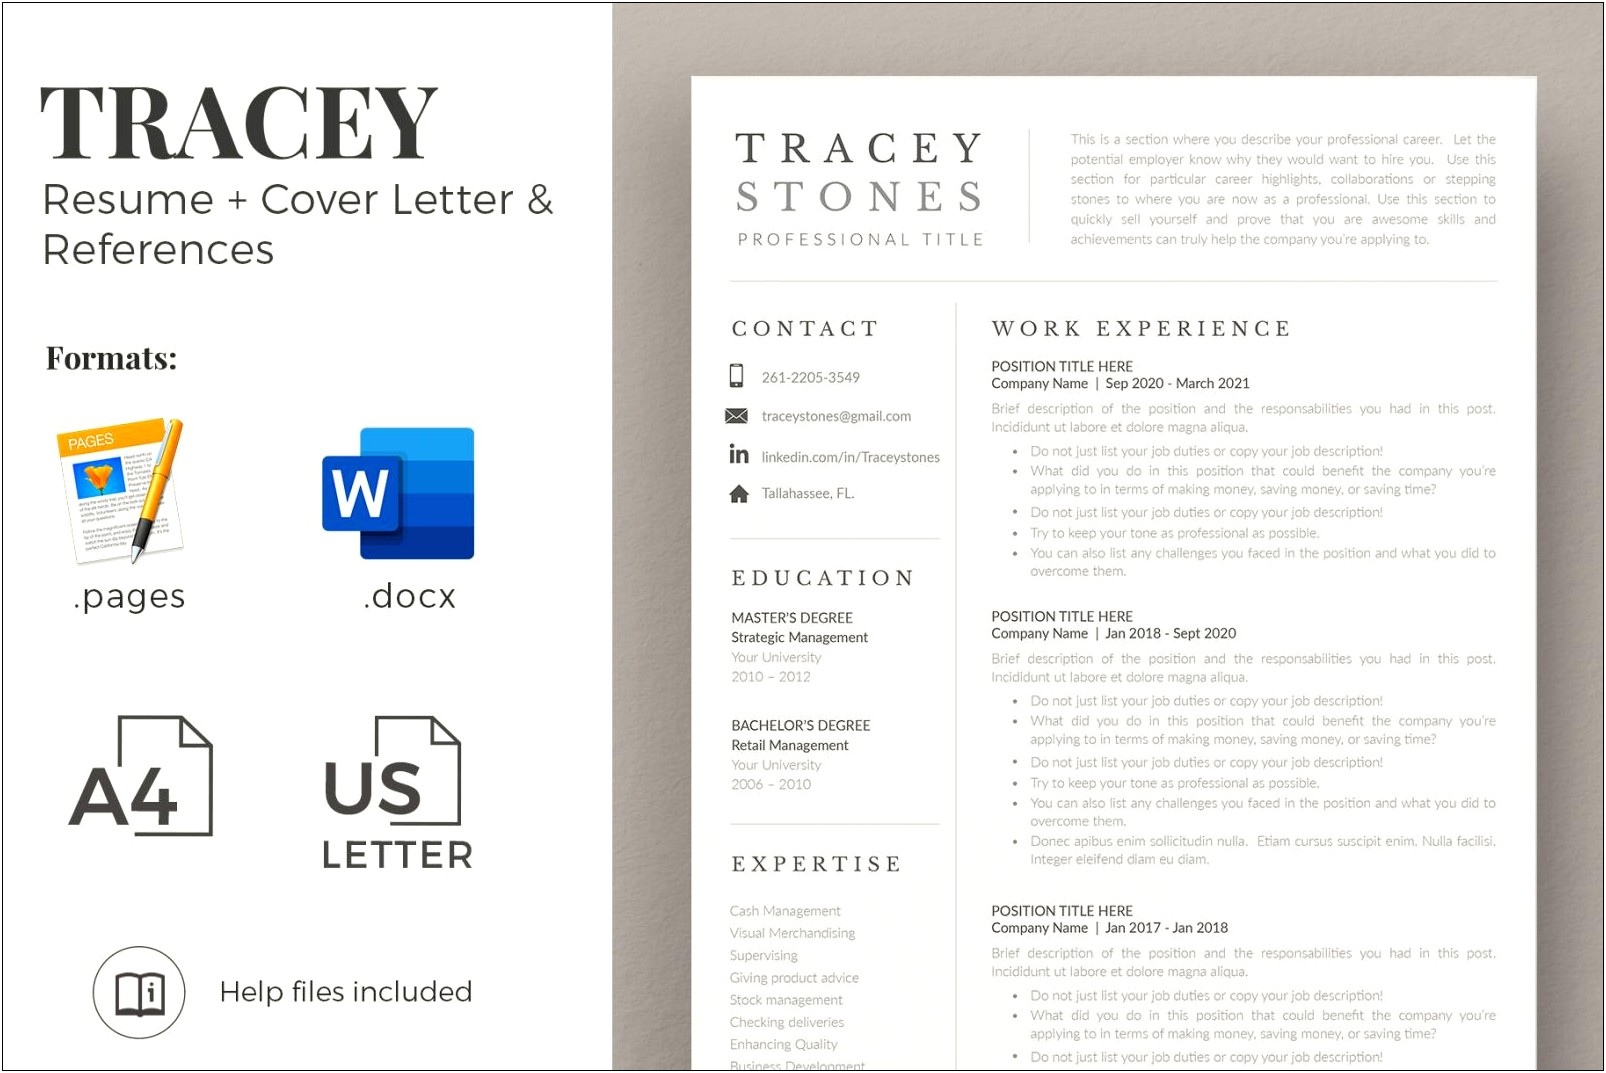 Free Resume Samples And Writing Guides For All